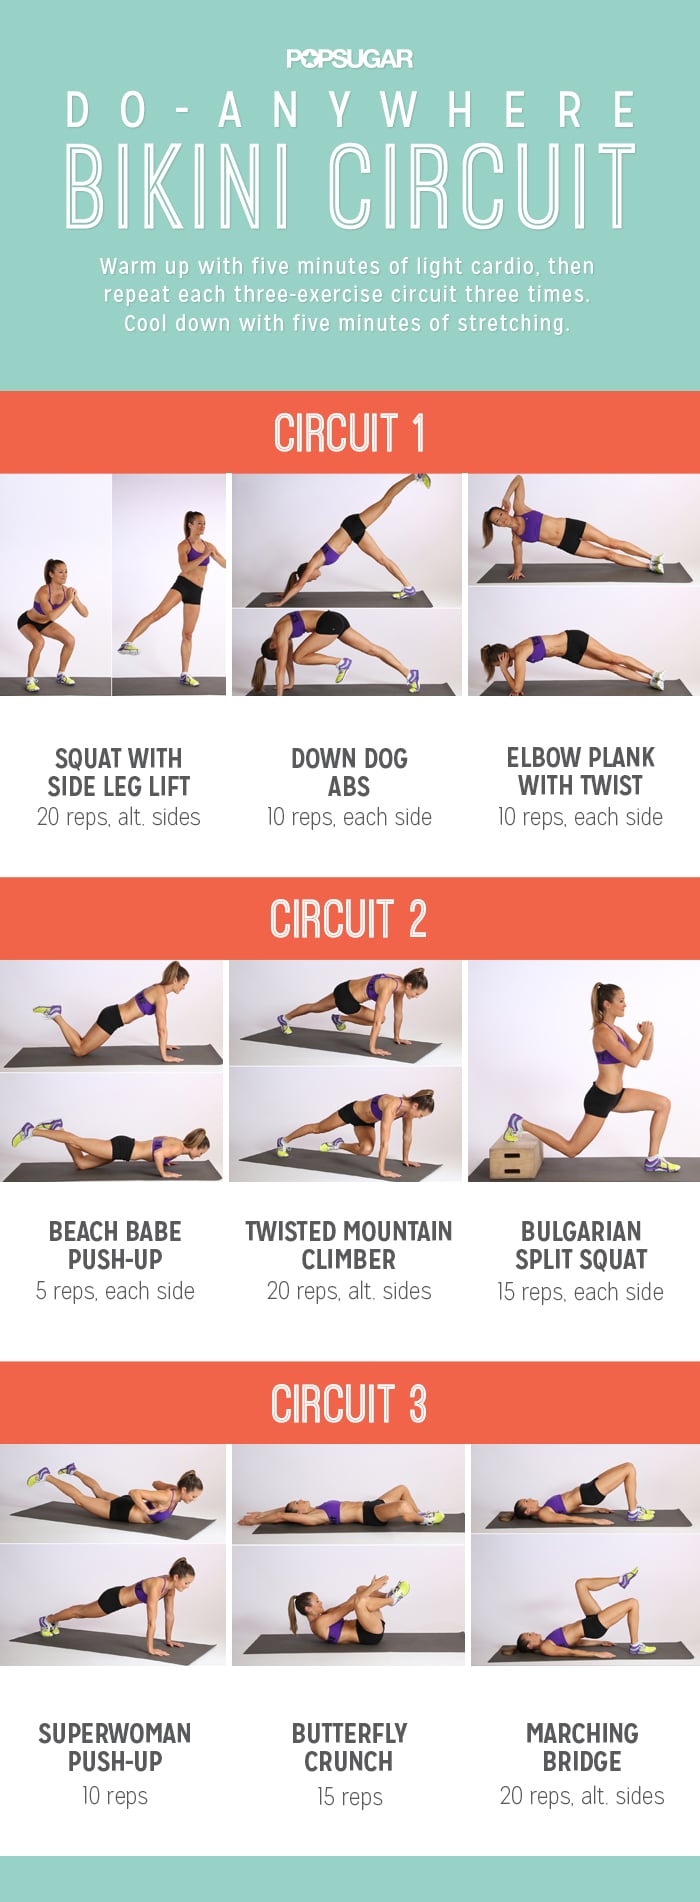 72 Workout Ideas  workout, fitness body, at home workouts